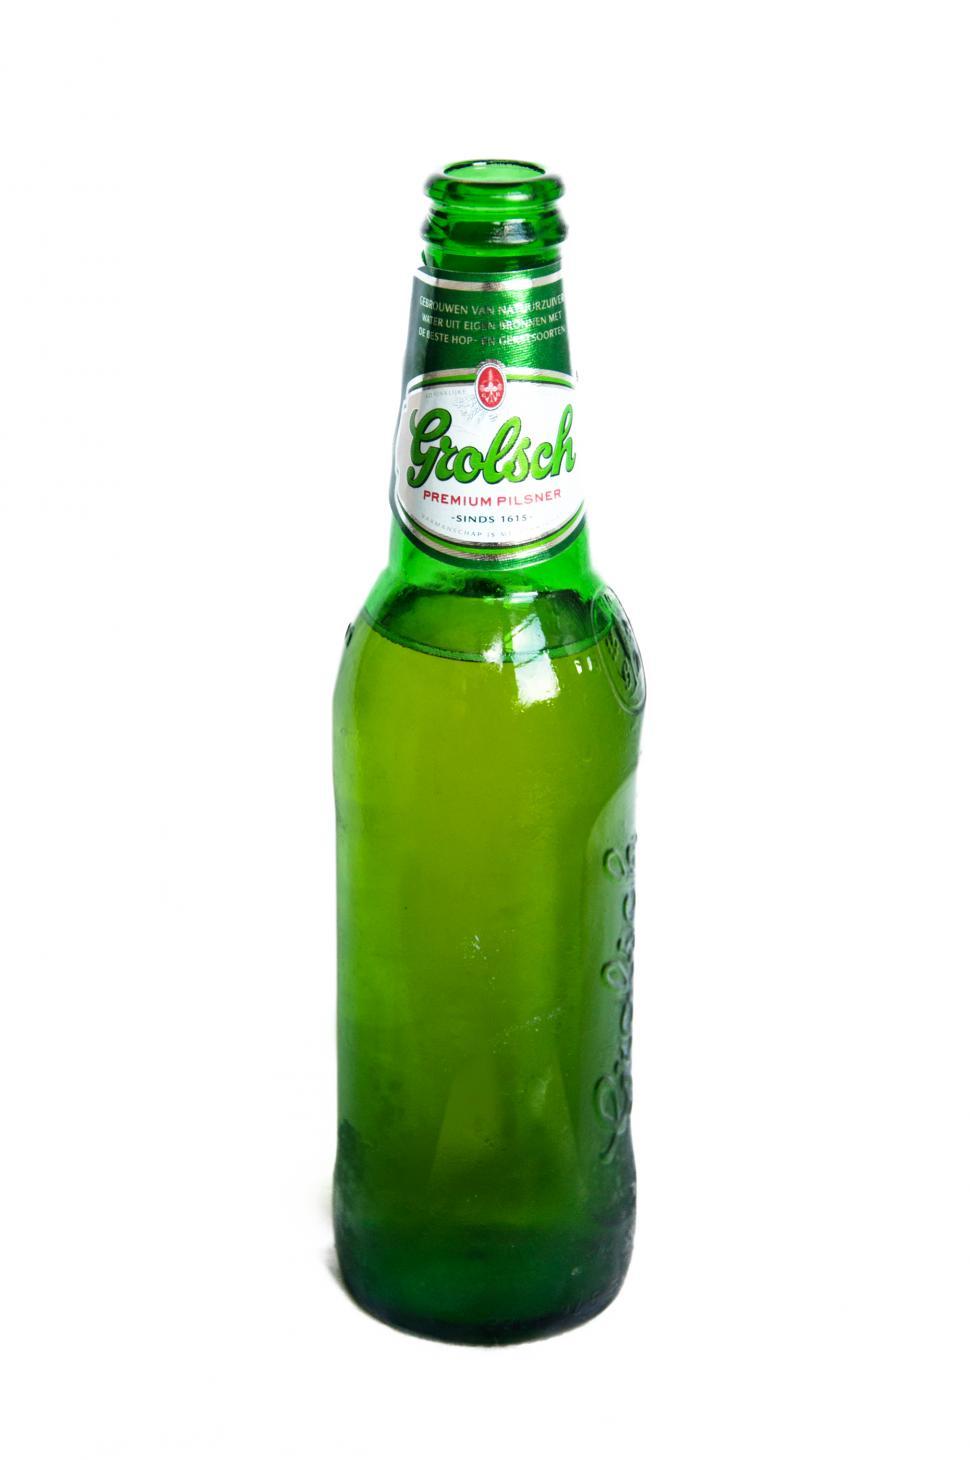 Free Image of bottle of beer on white background 